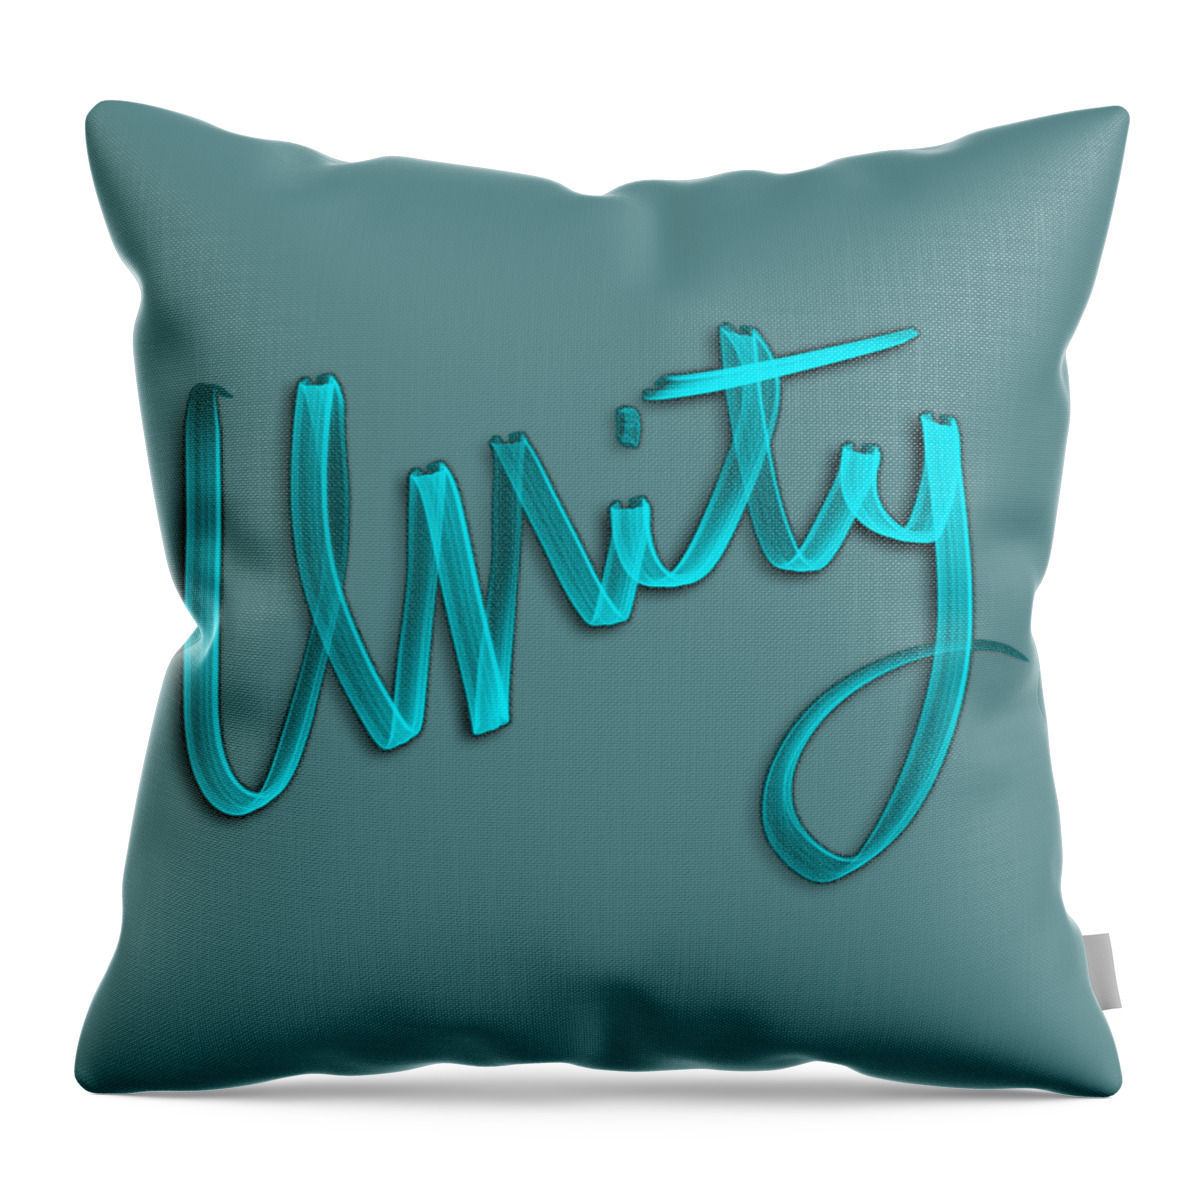 Lettering Throw Pillow featuring the drawing Unity by Bill Owen